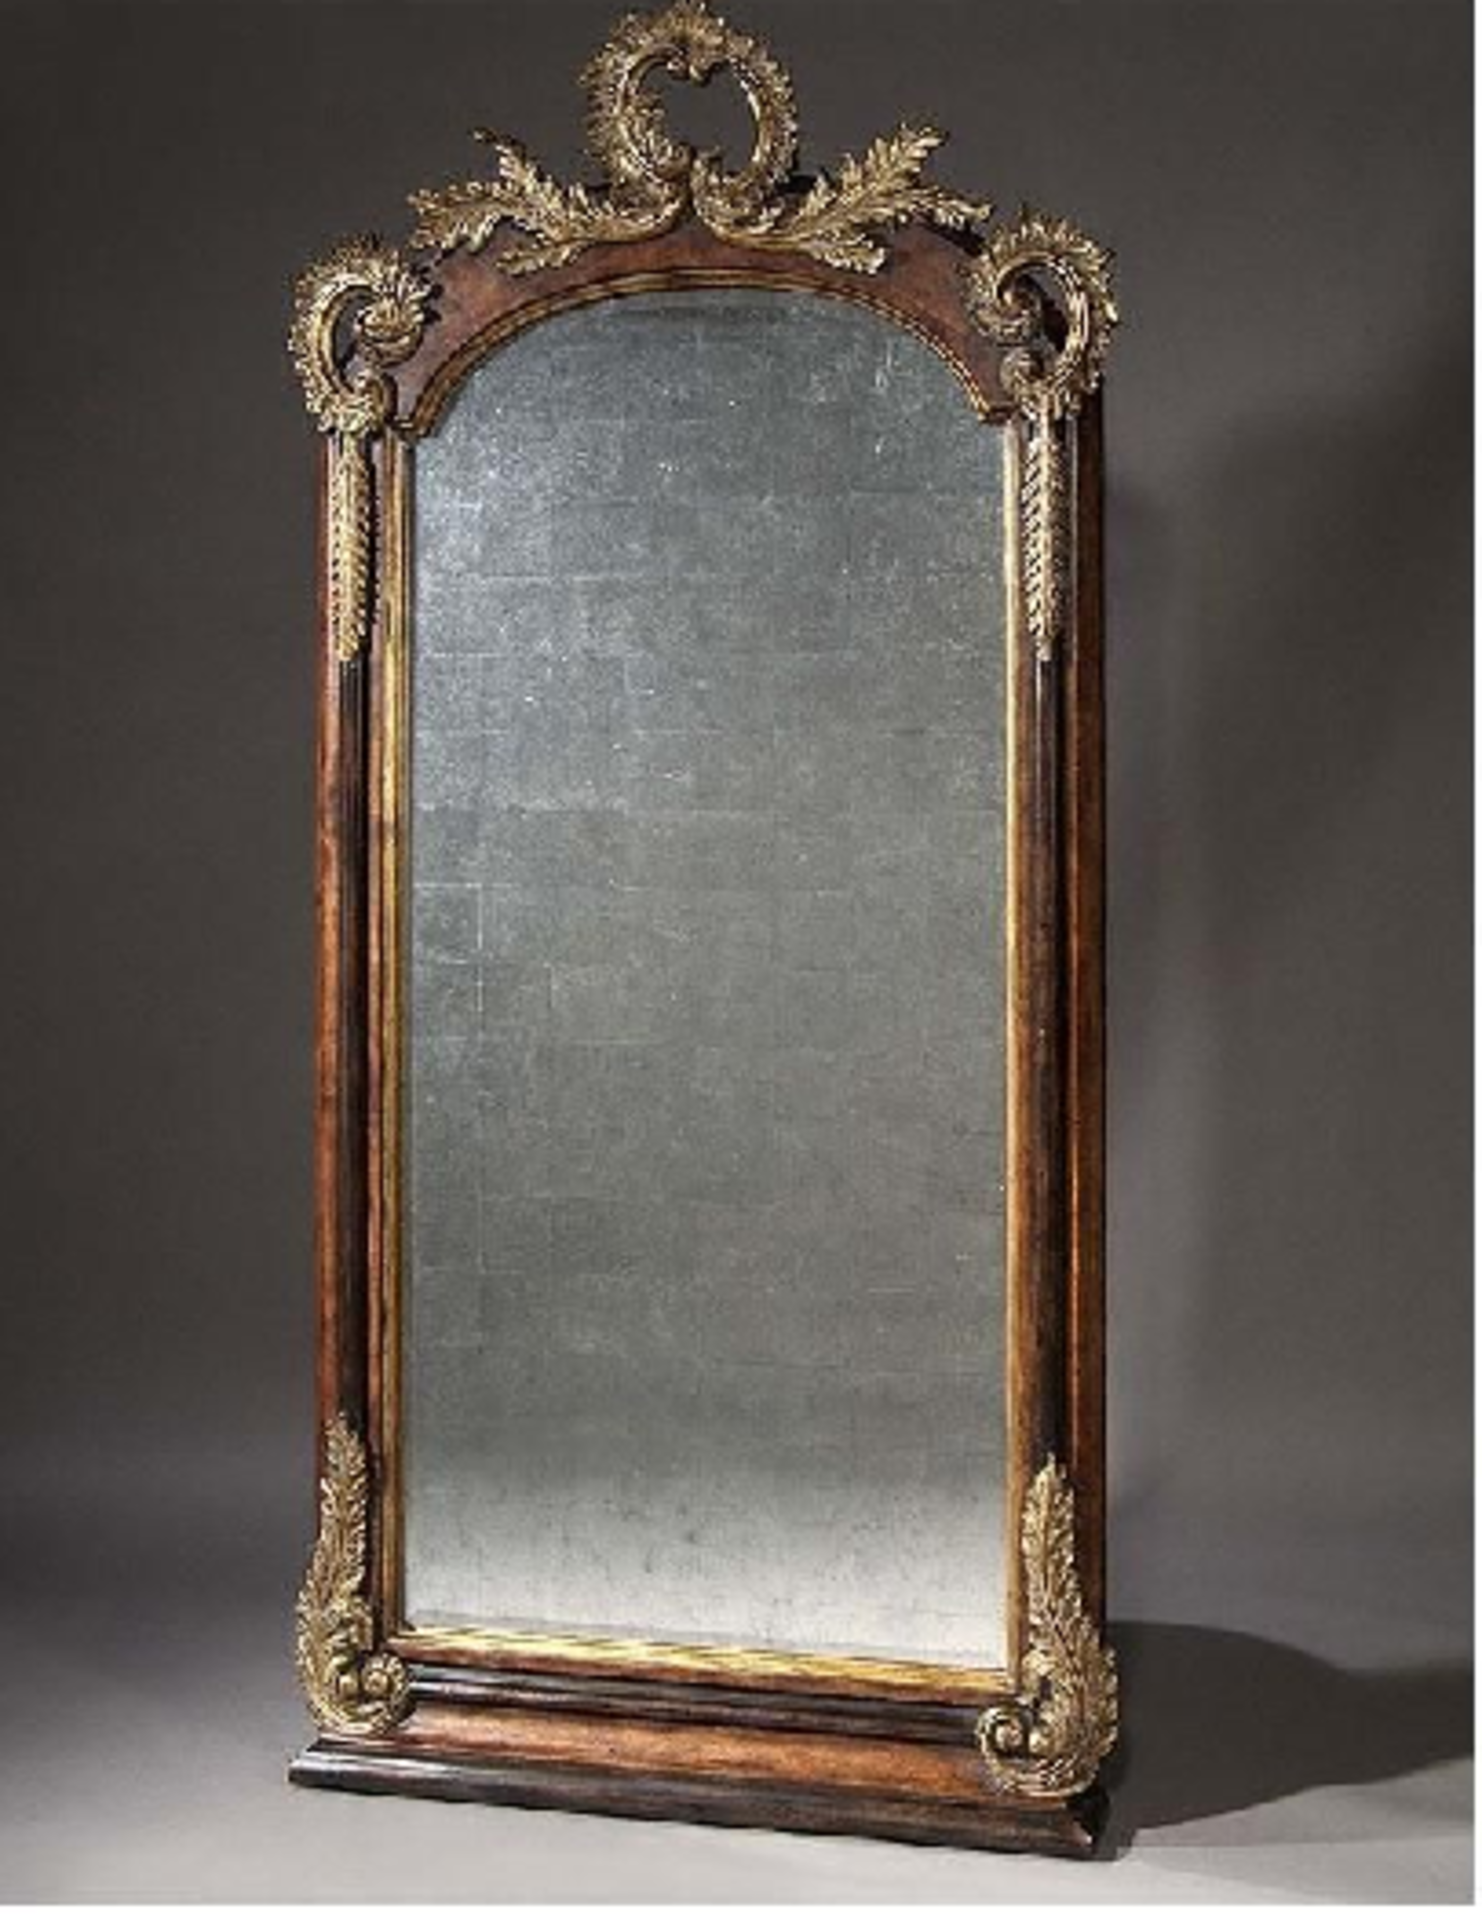 Hawkes Crest Floor Mirror A Traditional And Beautifully Decorated Floor Mirror With Arched-Top